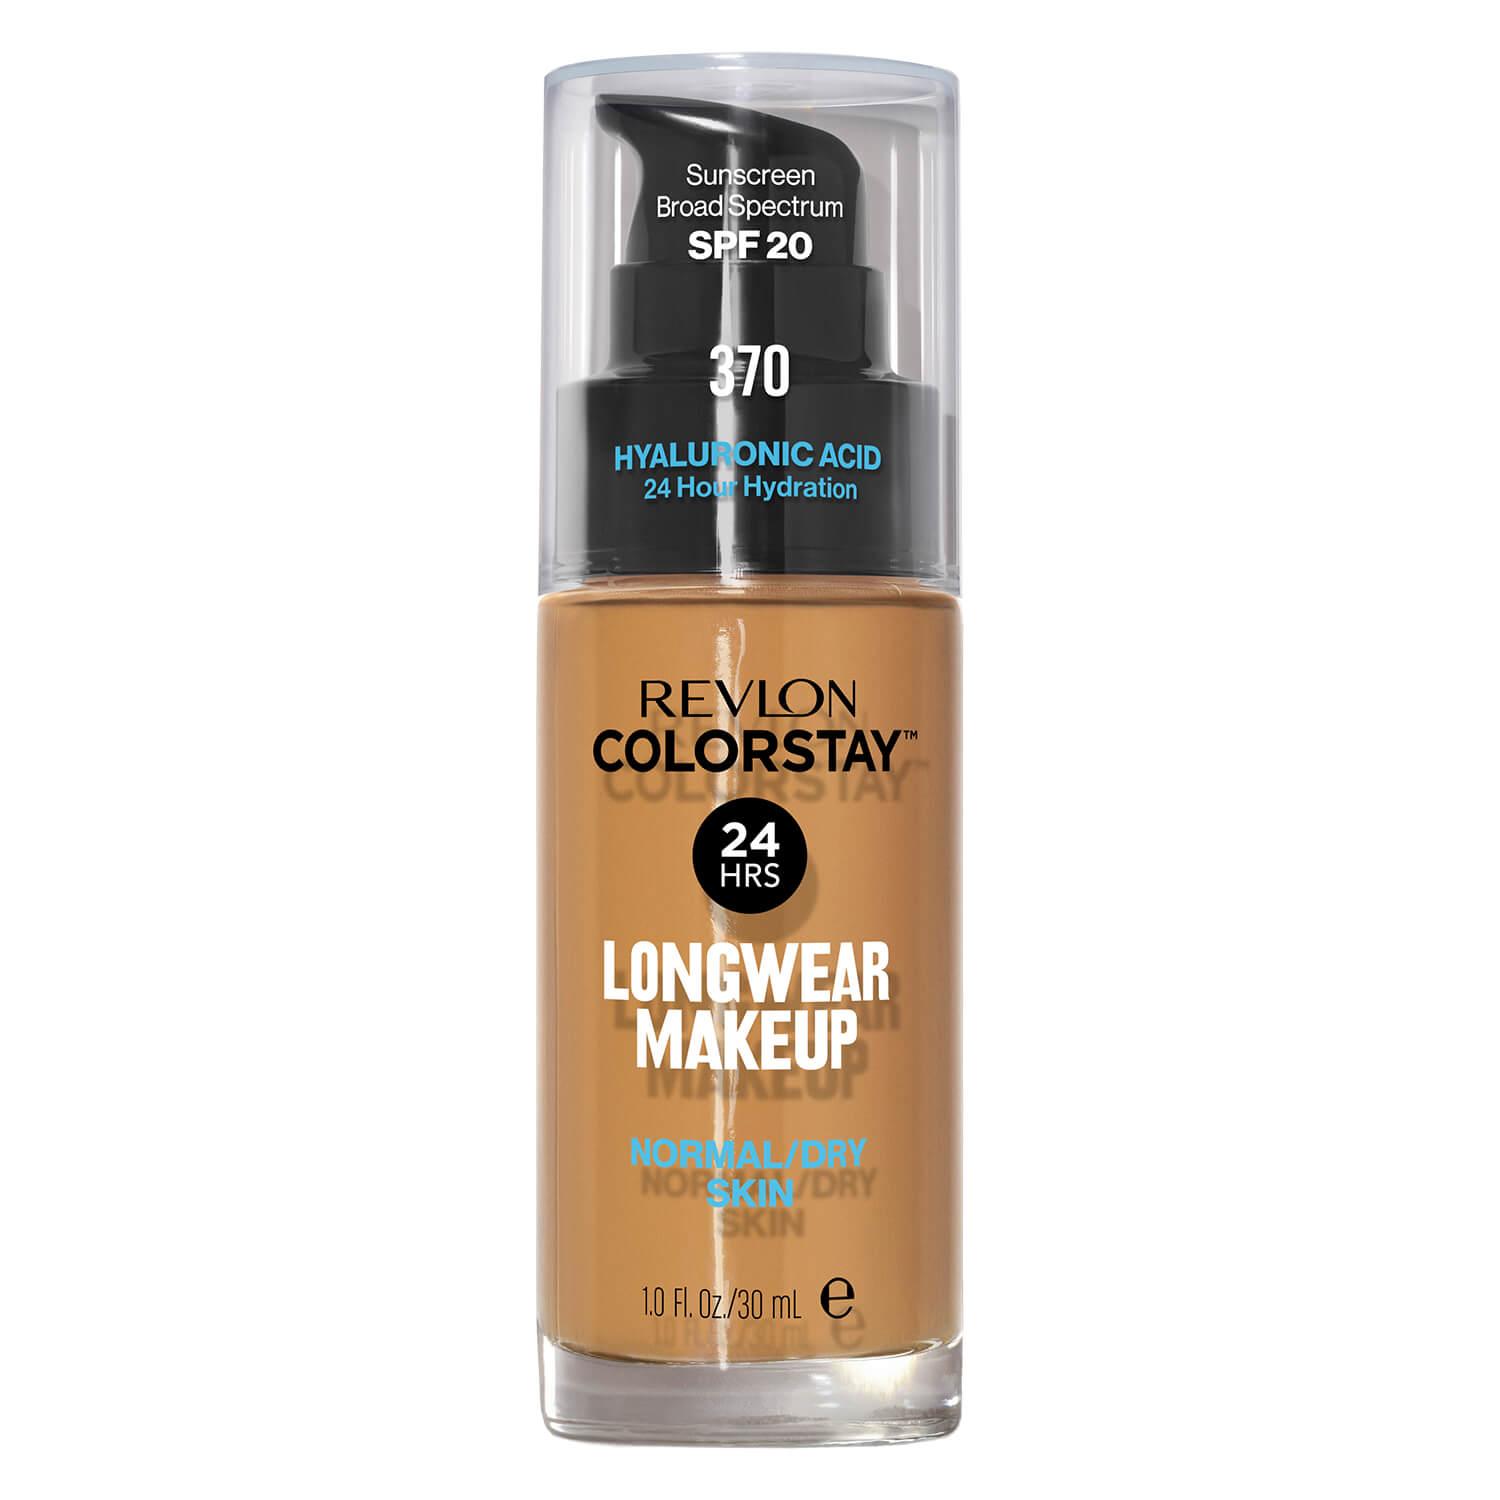 REVLON Face - ColorStay Makeup Normal/Dry Skin Toast 370